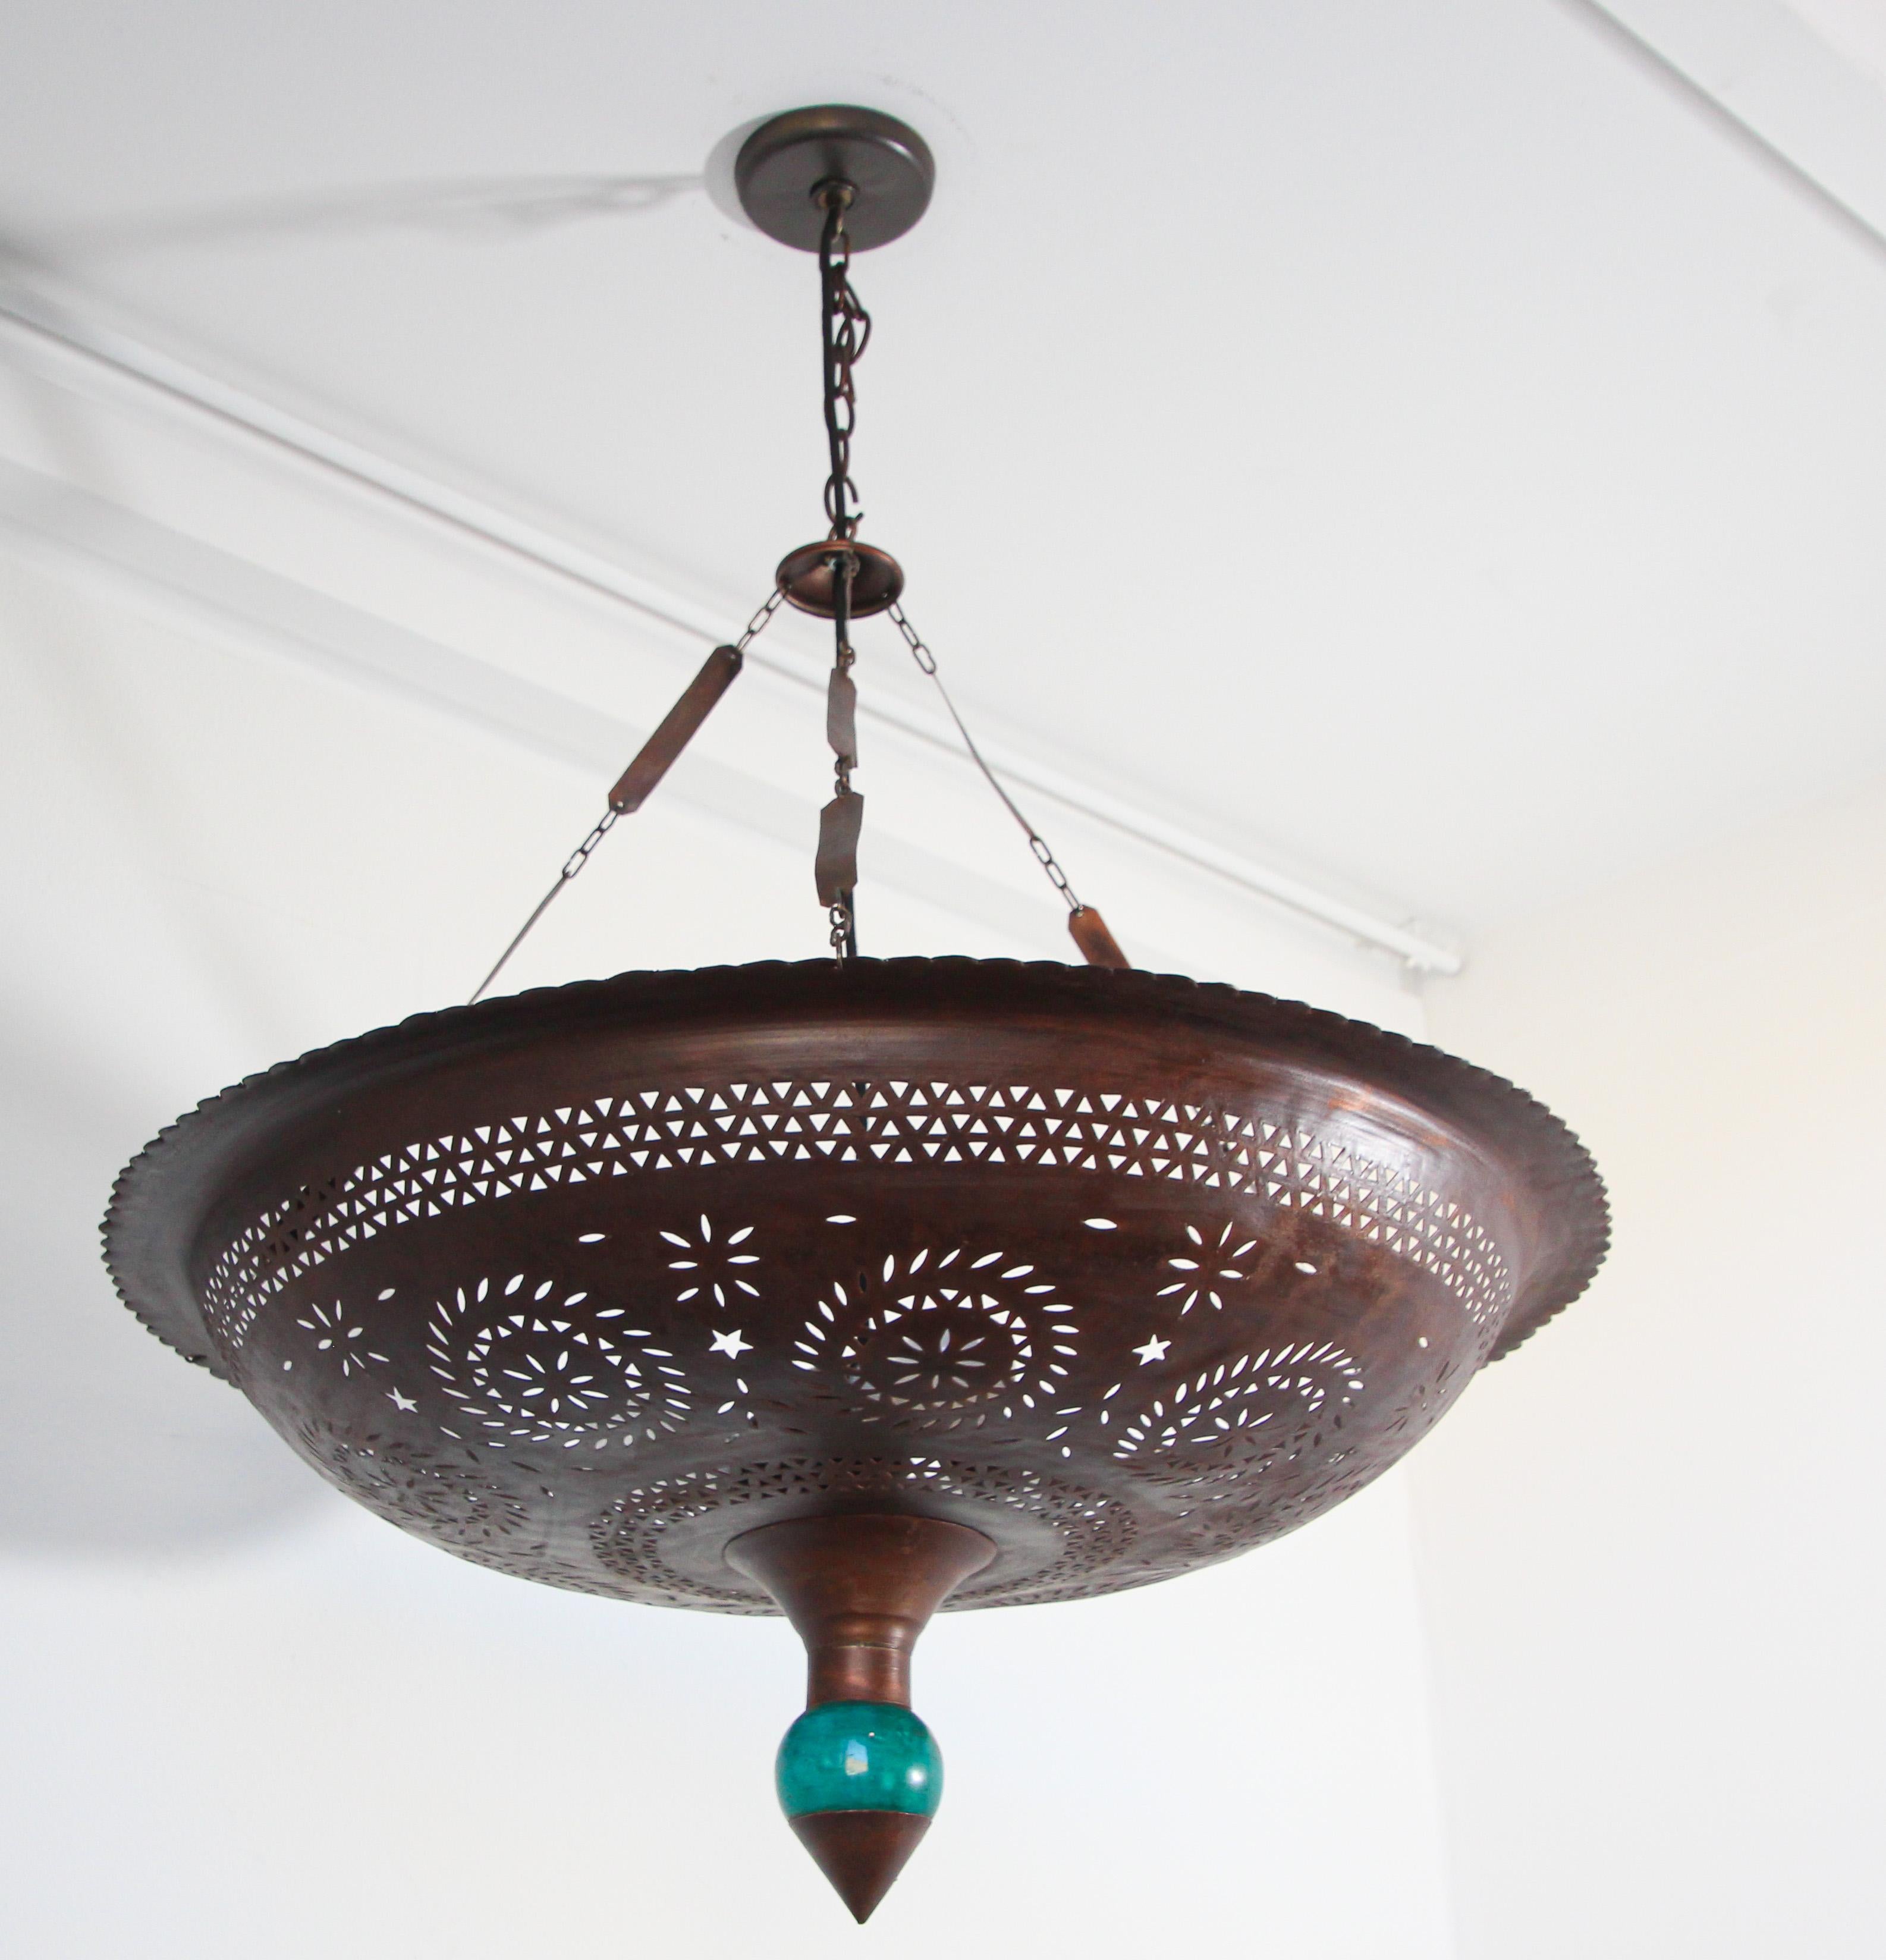 Large vintage Moroccan handcrafted hanging metal ceiling light with nice intricate geometric Moorish cut-out and a blue teal turquoise ceramic porcelain final.
The cut out of this large ceiling pendant light will creates a sole uplight that